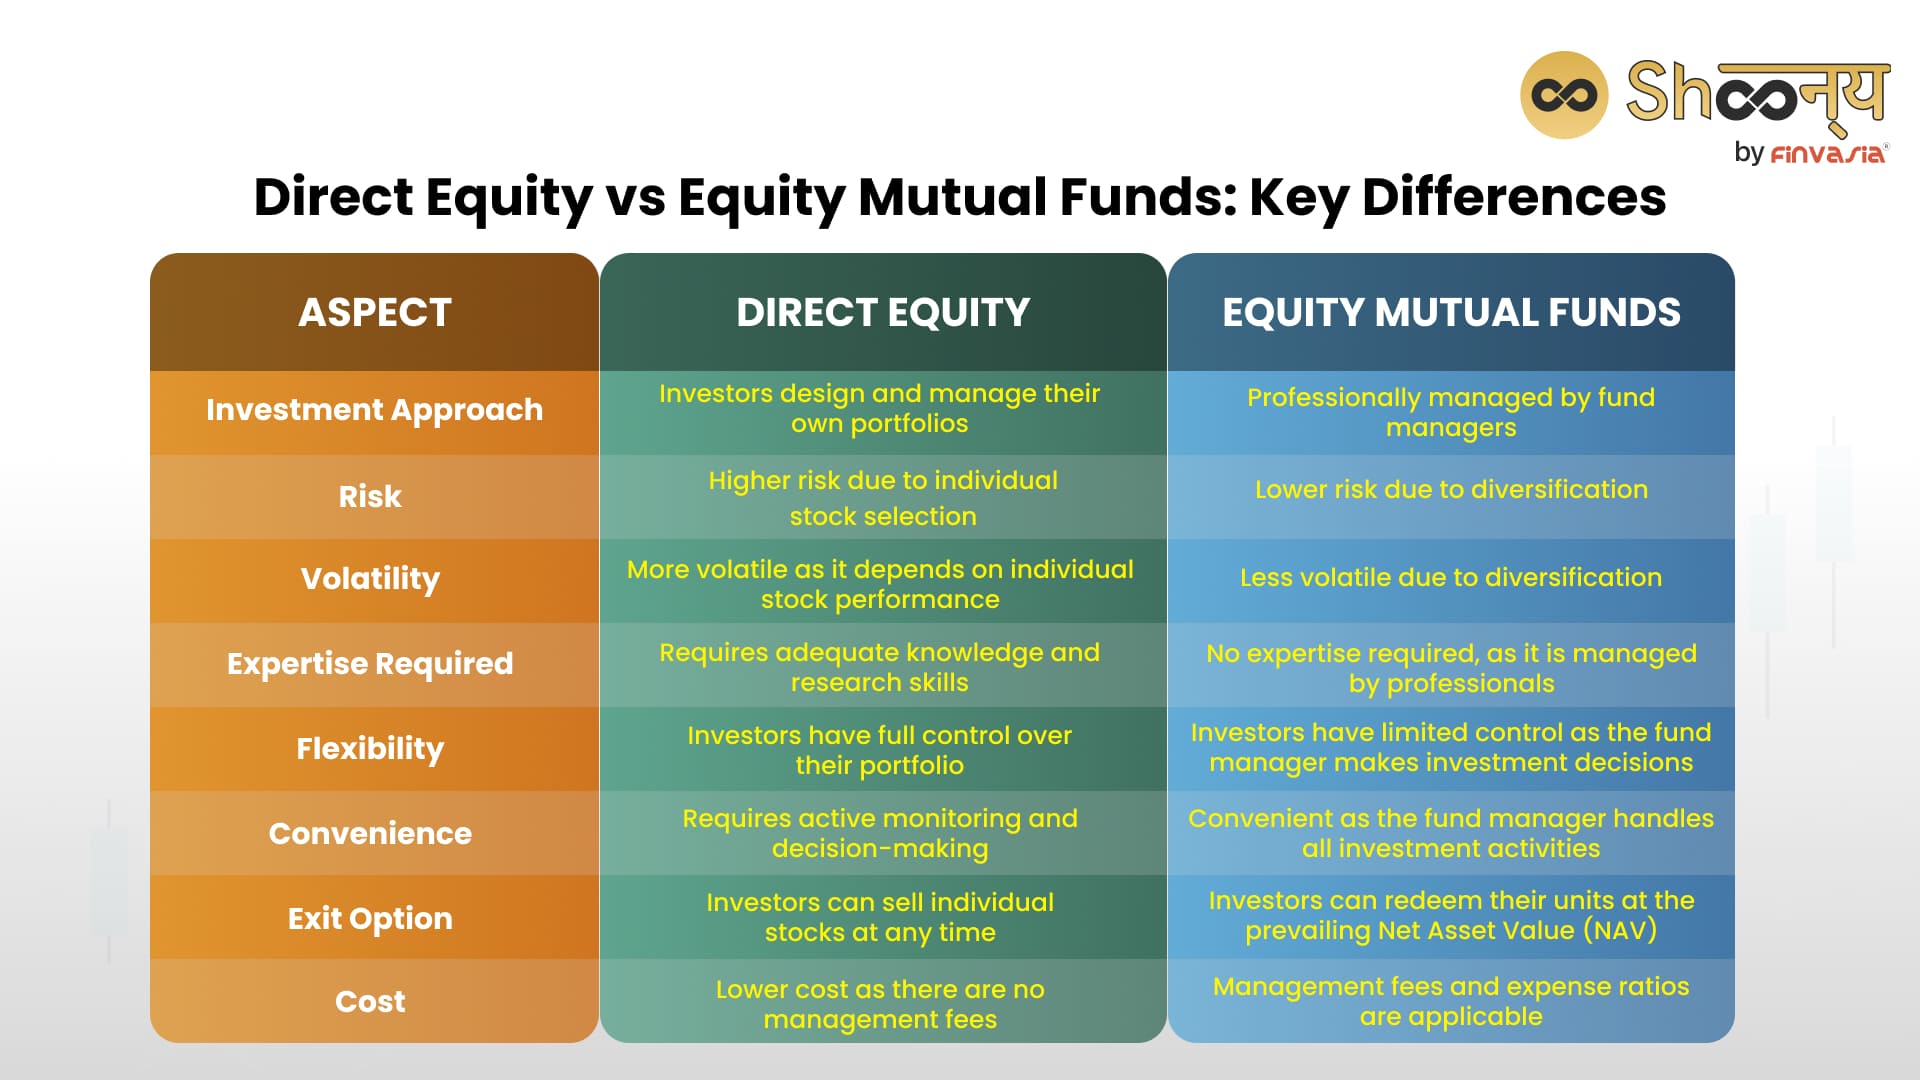 Direct Equity vs Equity Mutual Funds: Key Differences
